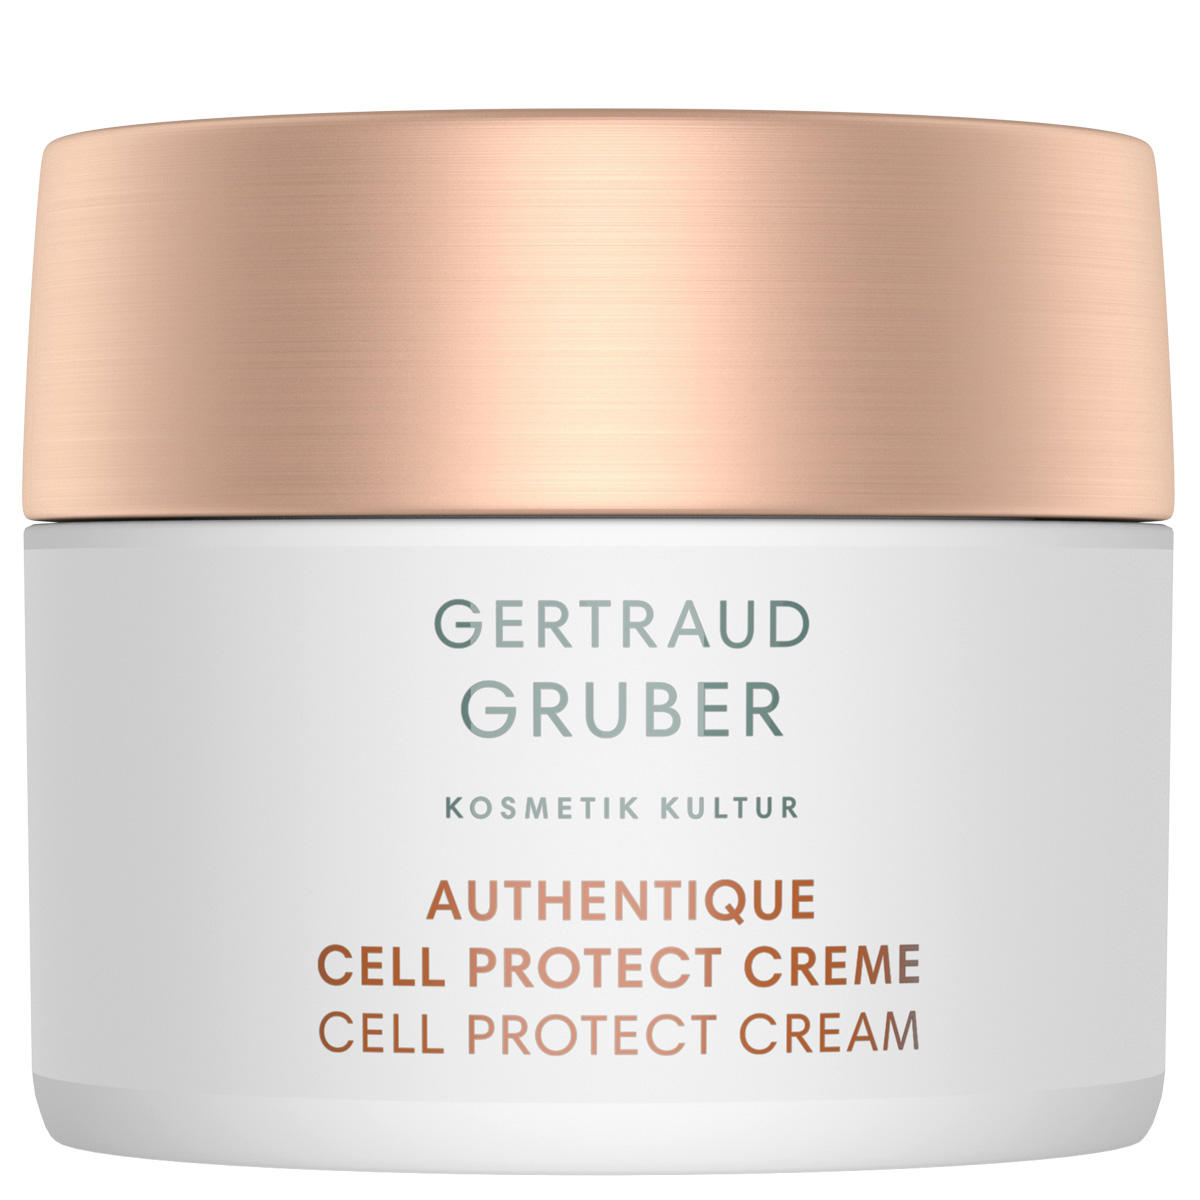 GERTRAUD GRUBER AUTHENTIQUE Cell Protect Creme 50 ml - 1